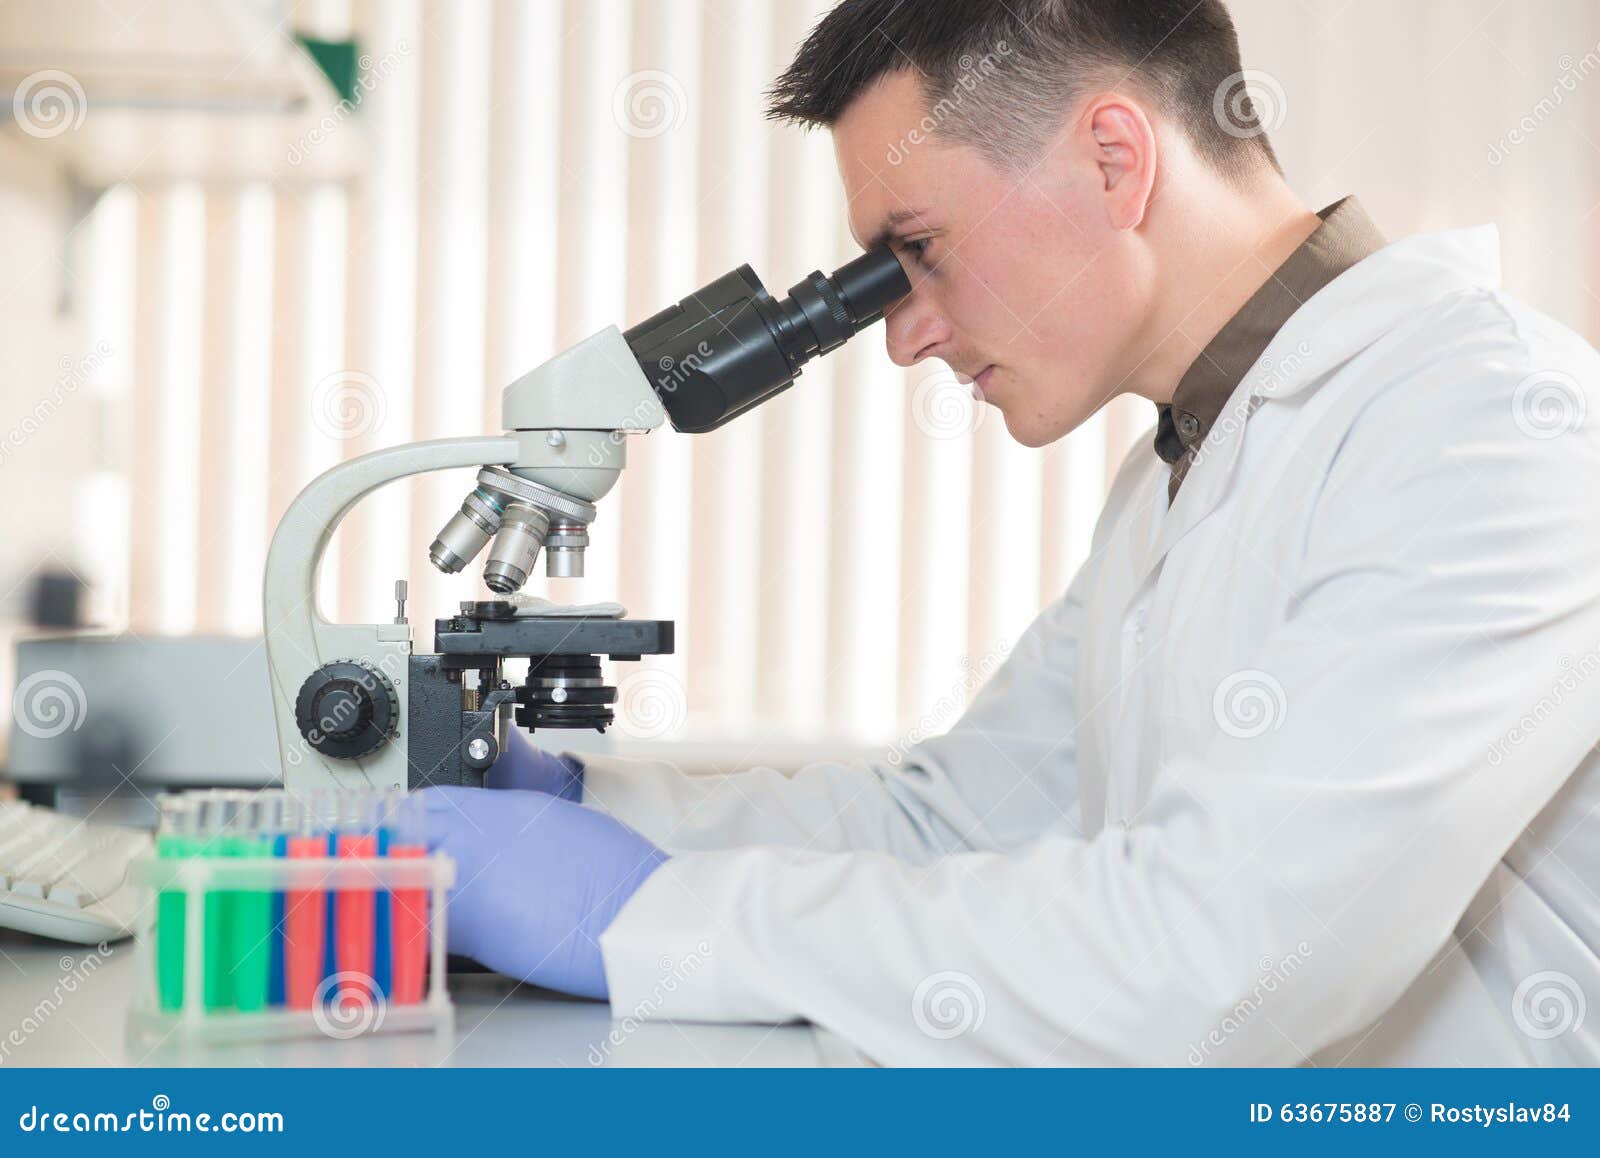 Young Scientist Working With A Microscope Stock Image Image Of